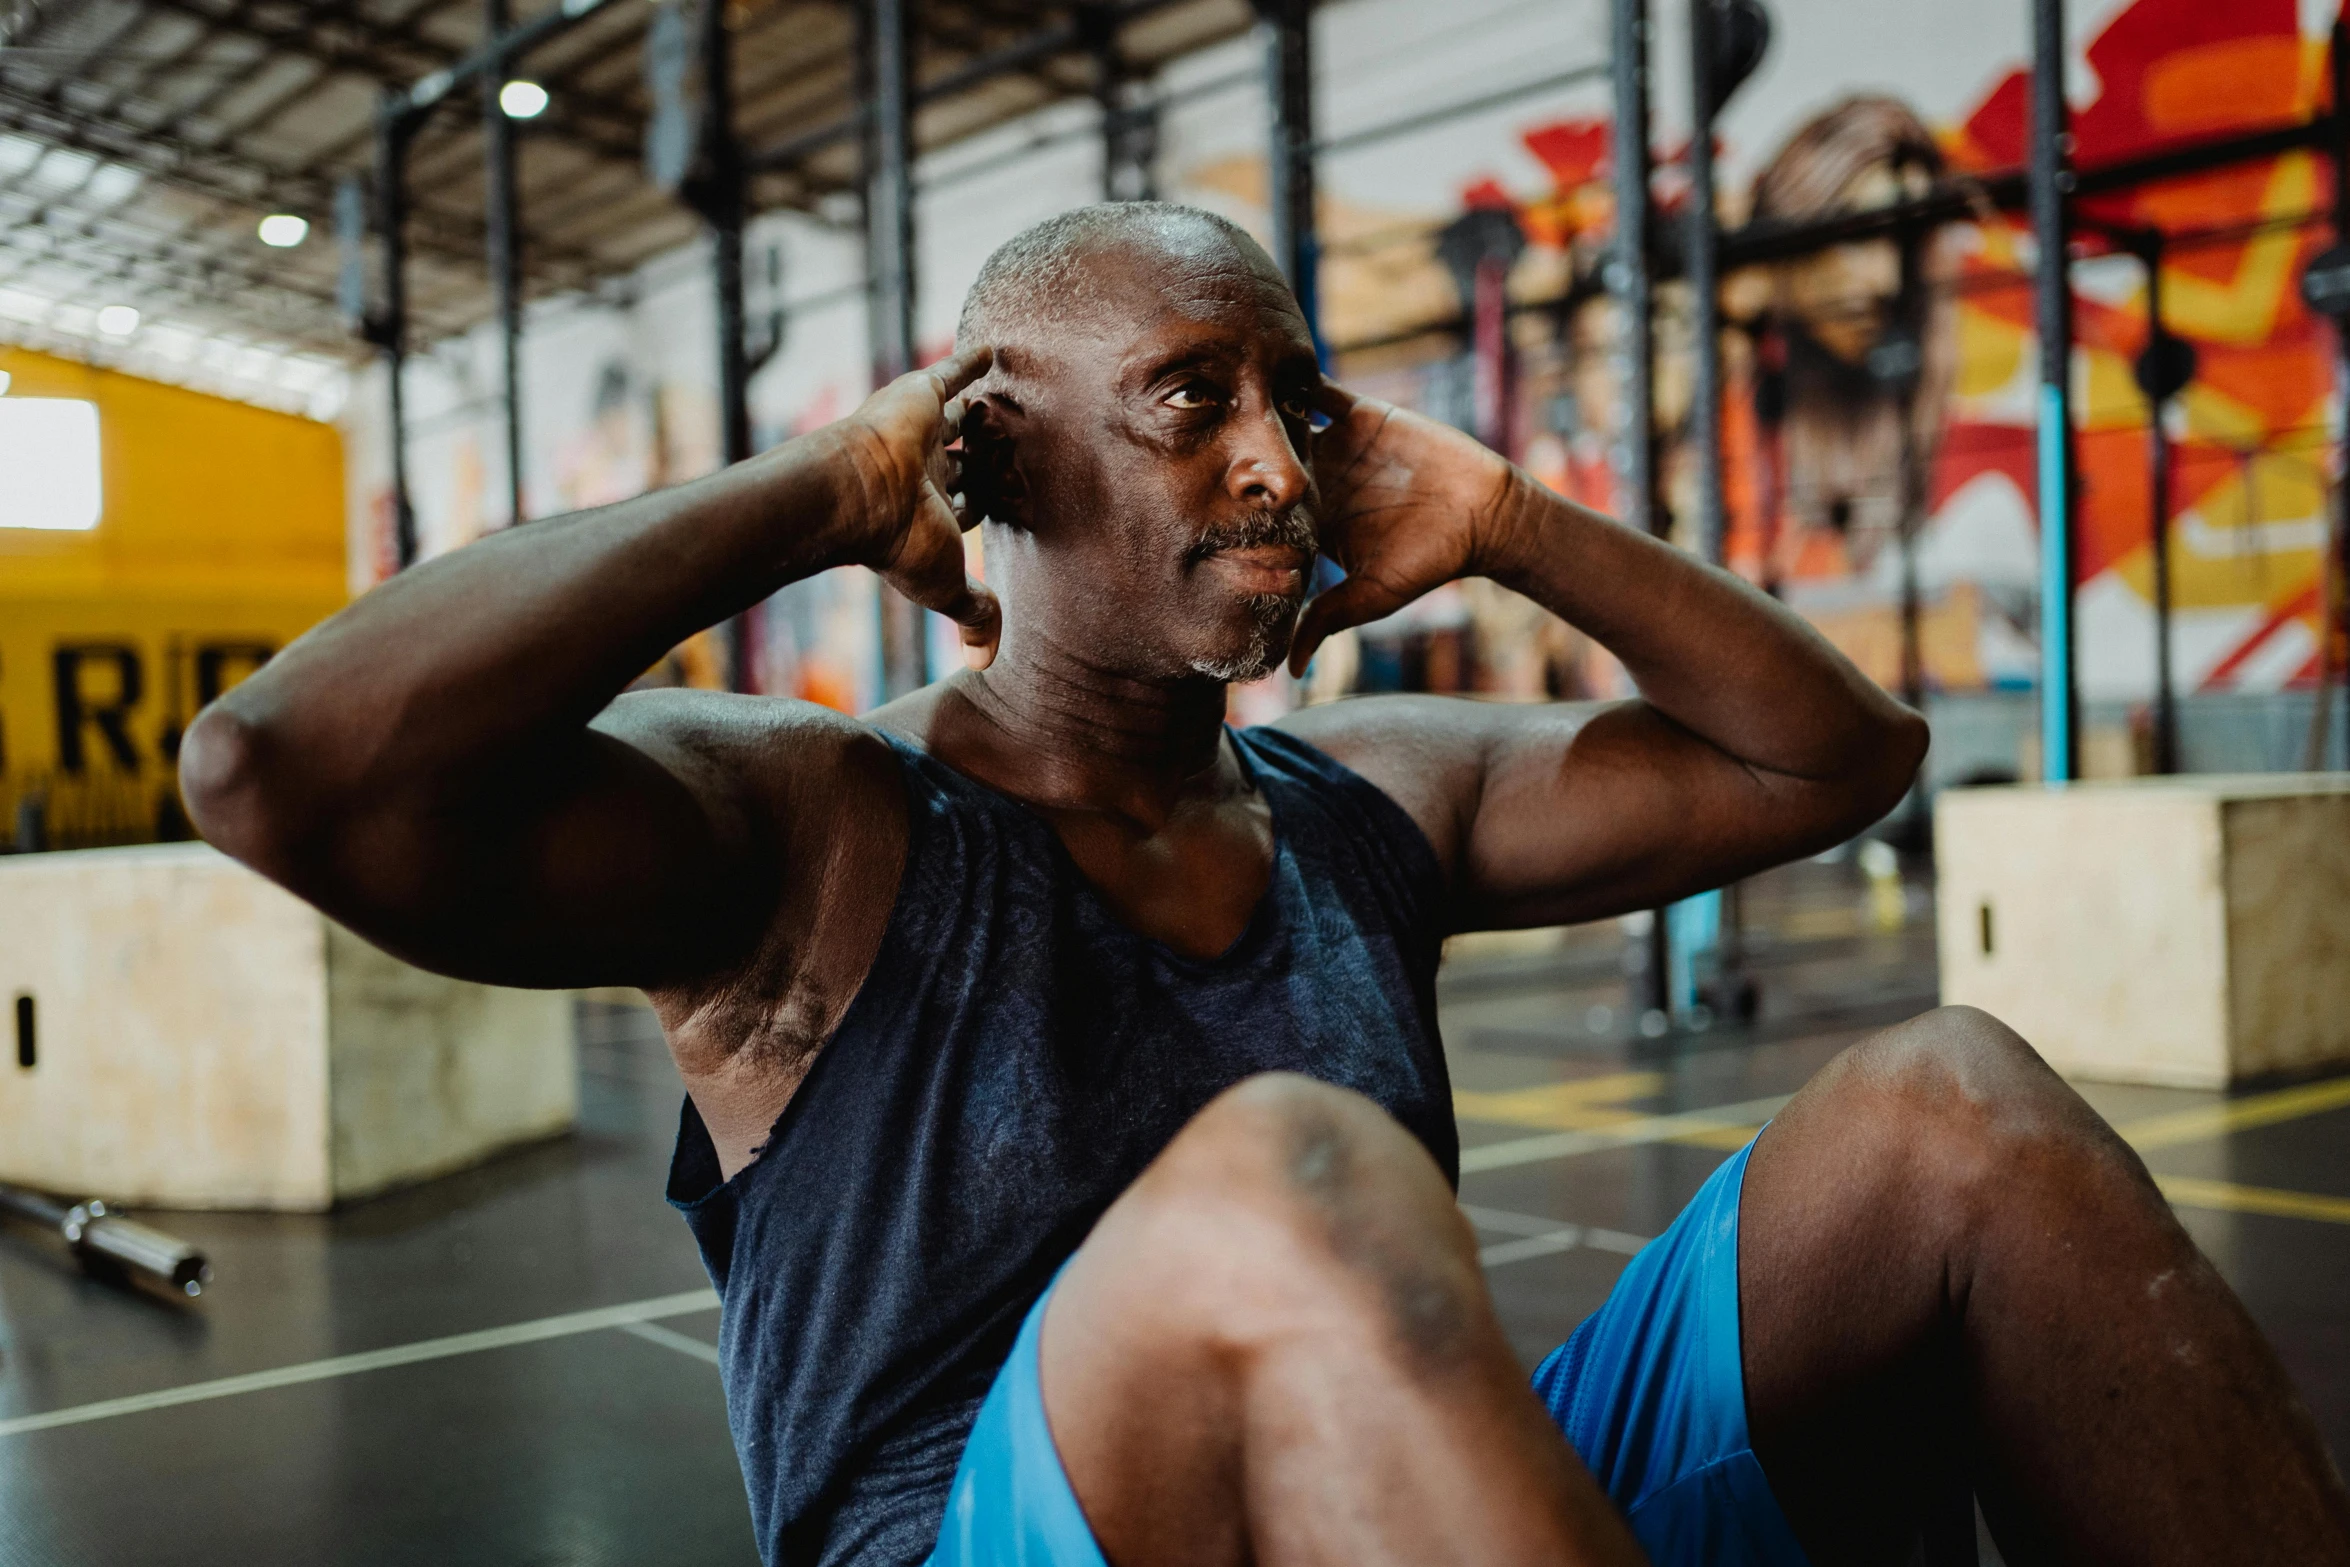 a man sitting on the ground talking on a cell phone, a portrait, pexels contest winner, hyperrealism, background a gym, man is with black skin, sweating hard, avatar image